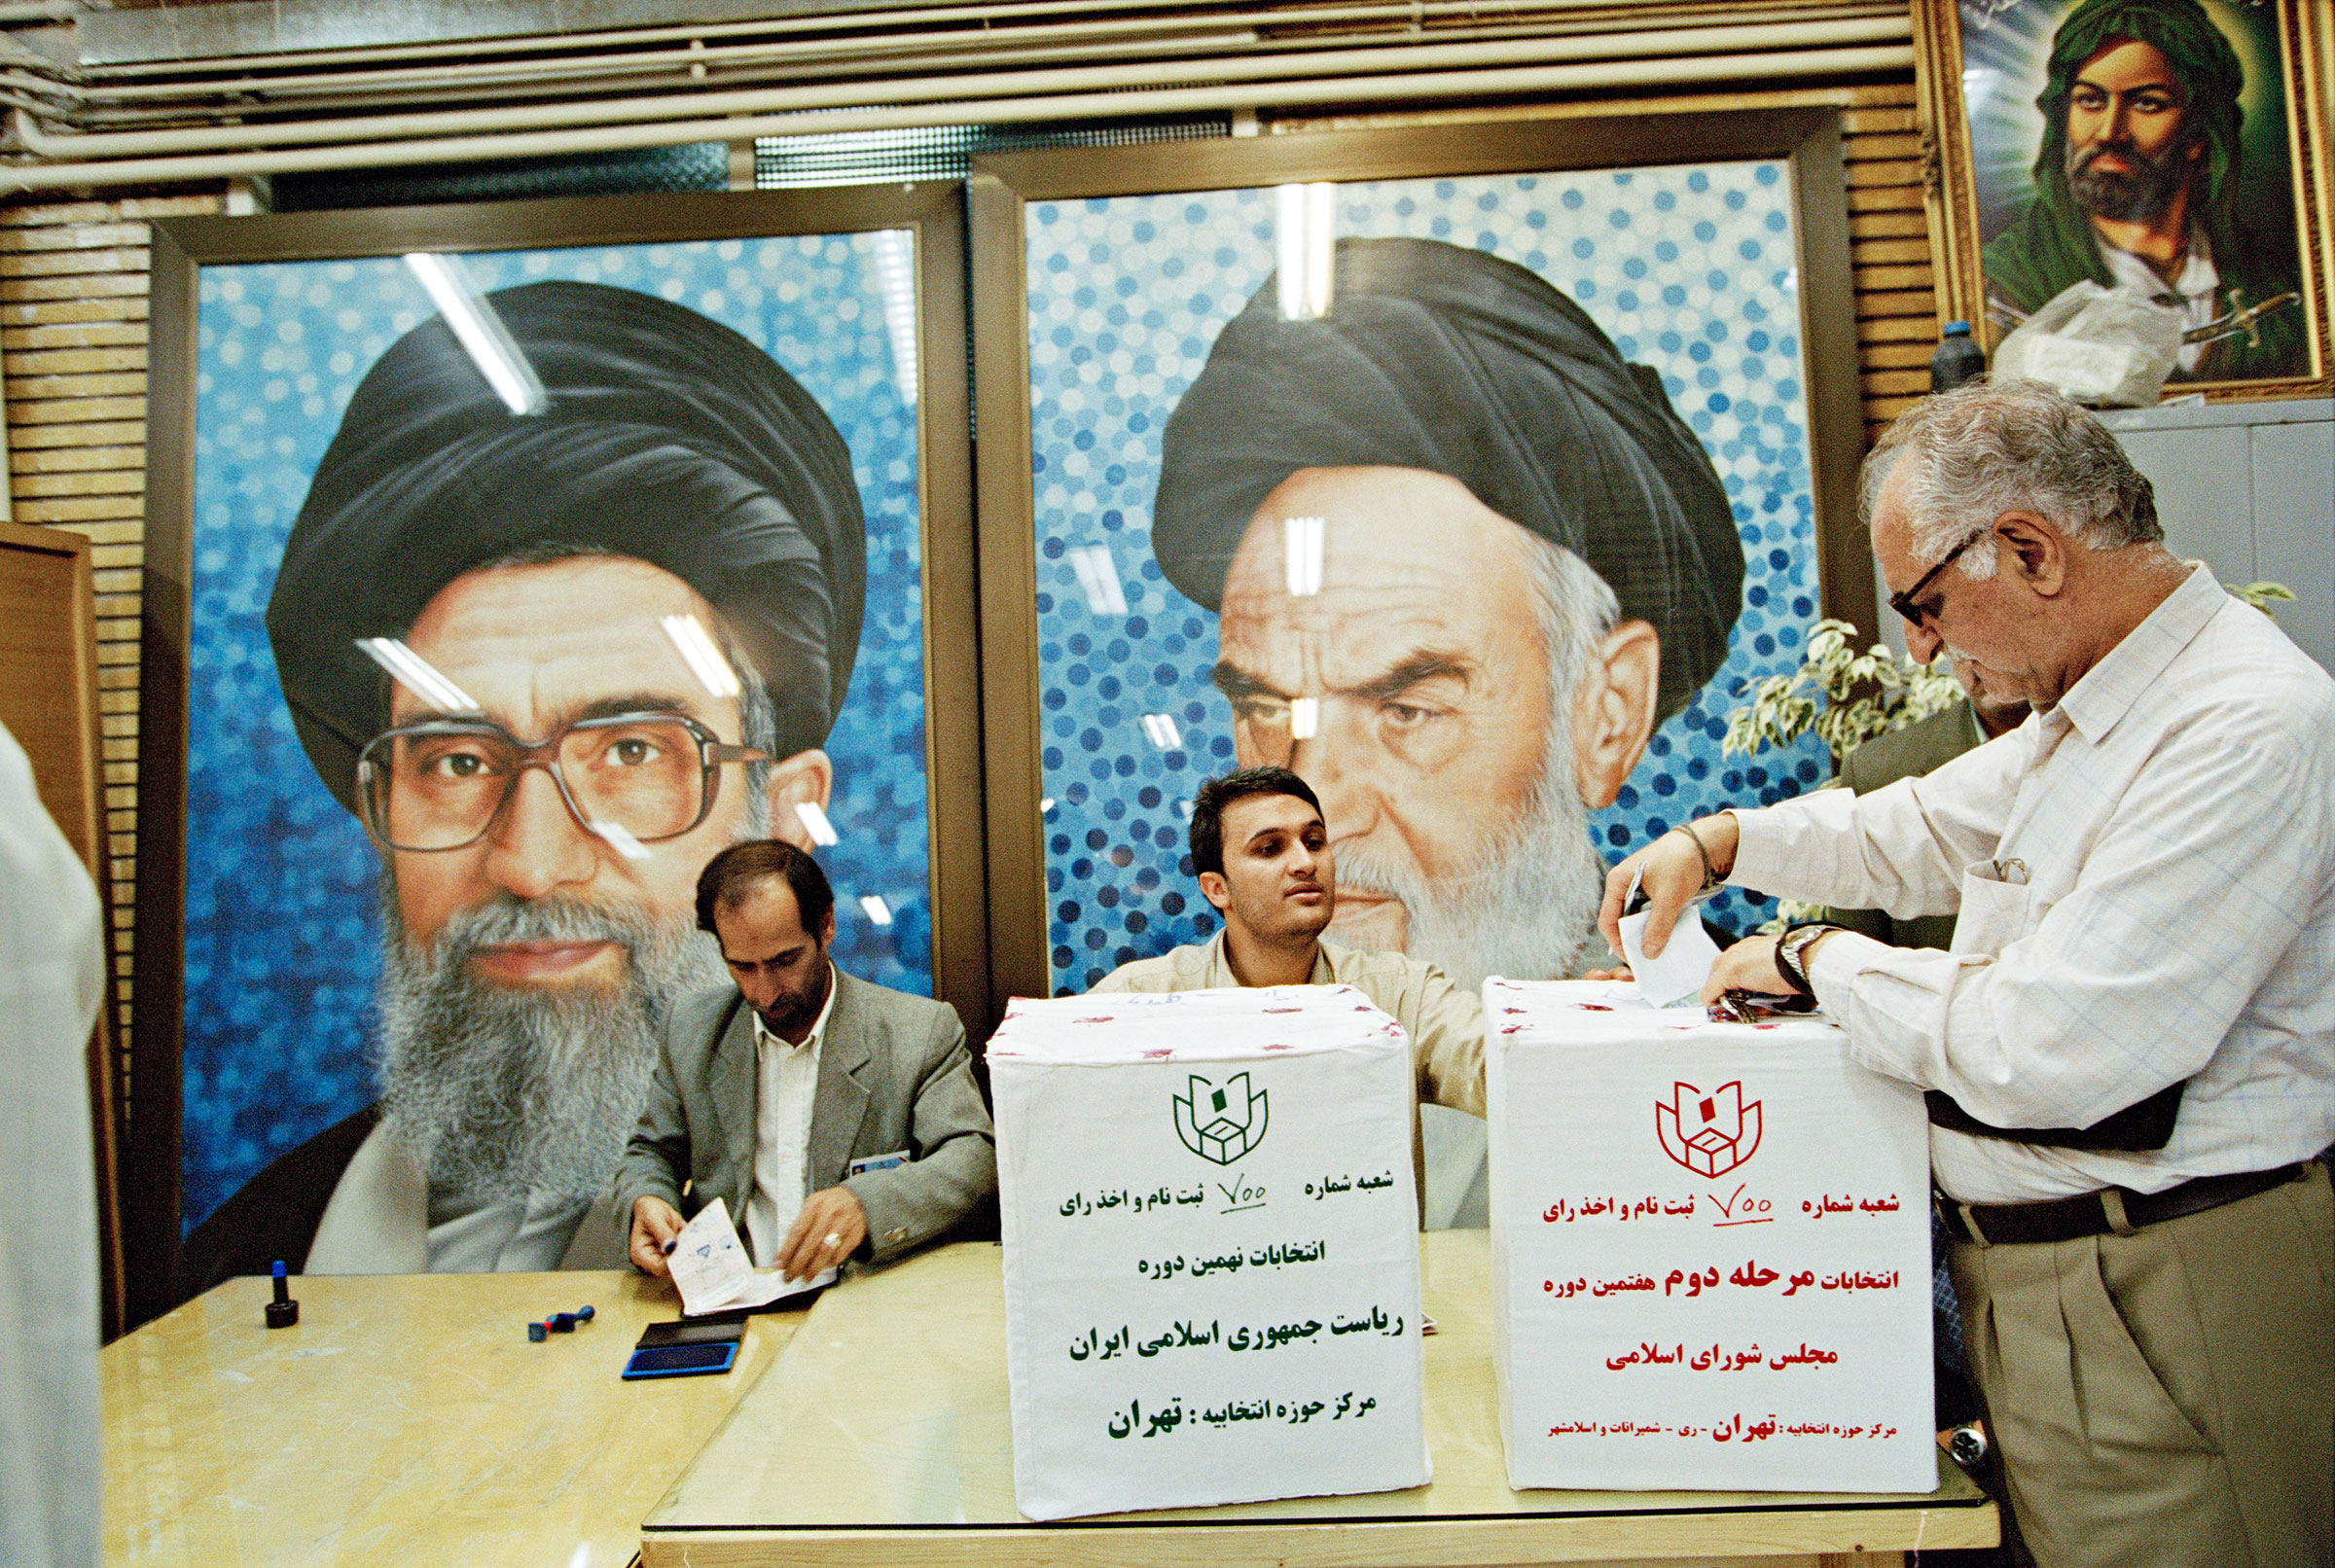 Portraits of Khamenei and his mentor and predecessor, Khomeini (right), at a Tehran polling place in June (A. Abbas—Magnum Photos)